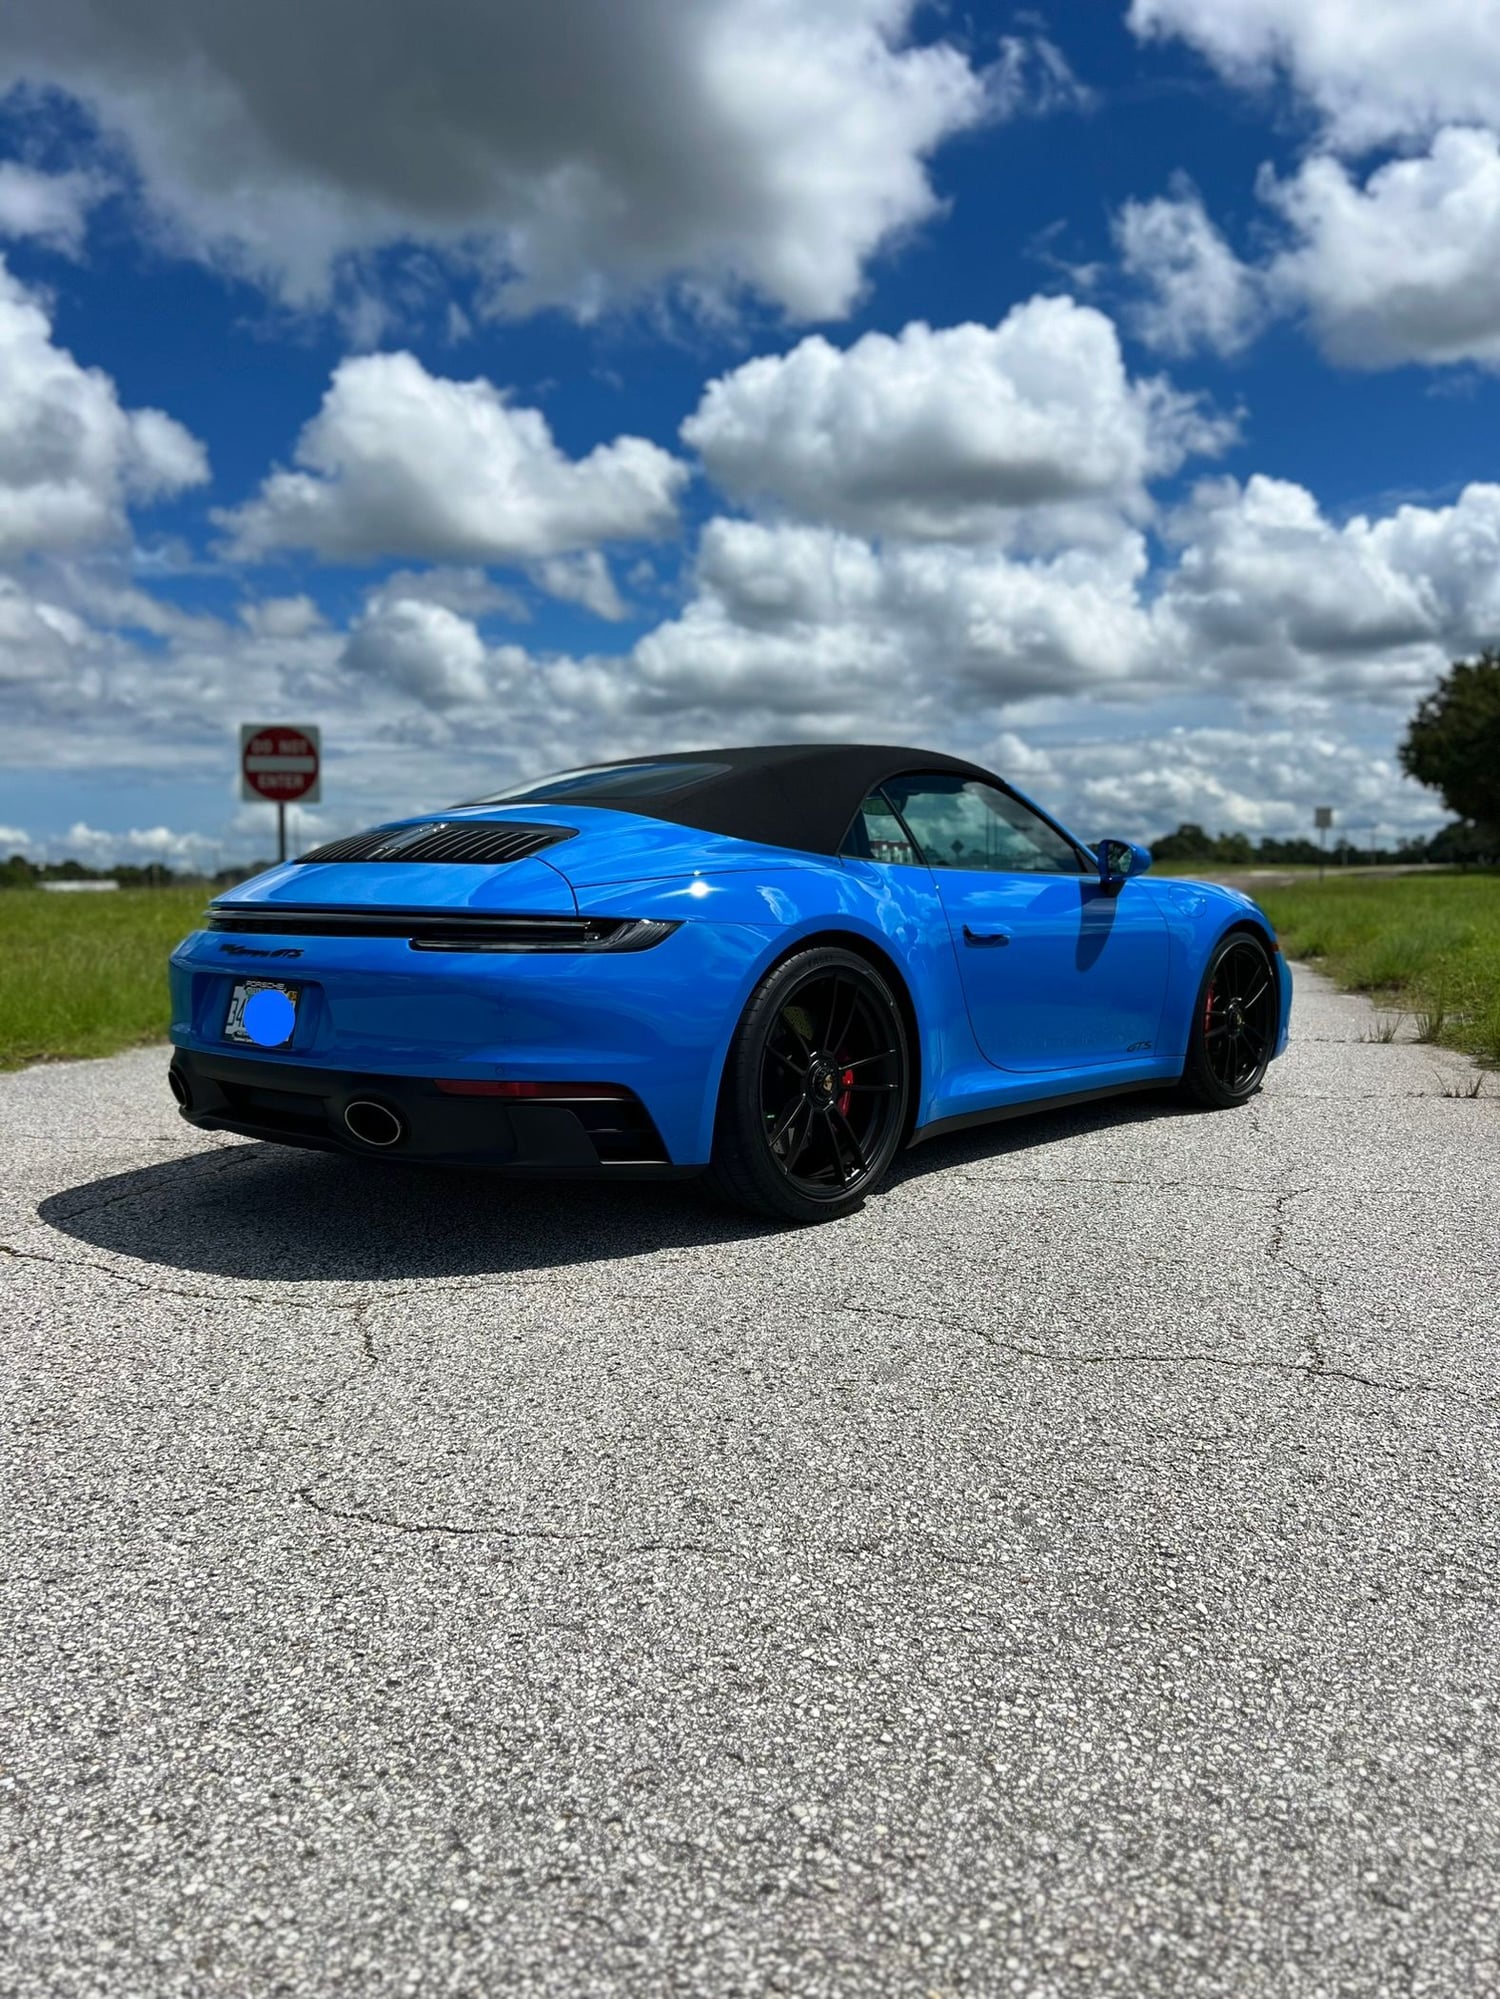 2022 Porsche 911 - 2022 911 GTS Cabriolet - Used - VIN WP0CB2A99NS244855 - 1,576 Miles - 2WD - Manual - Convertible - Blue - Orlando, FL 32801, United States